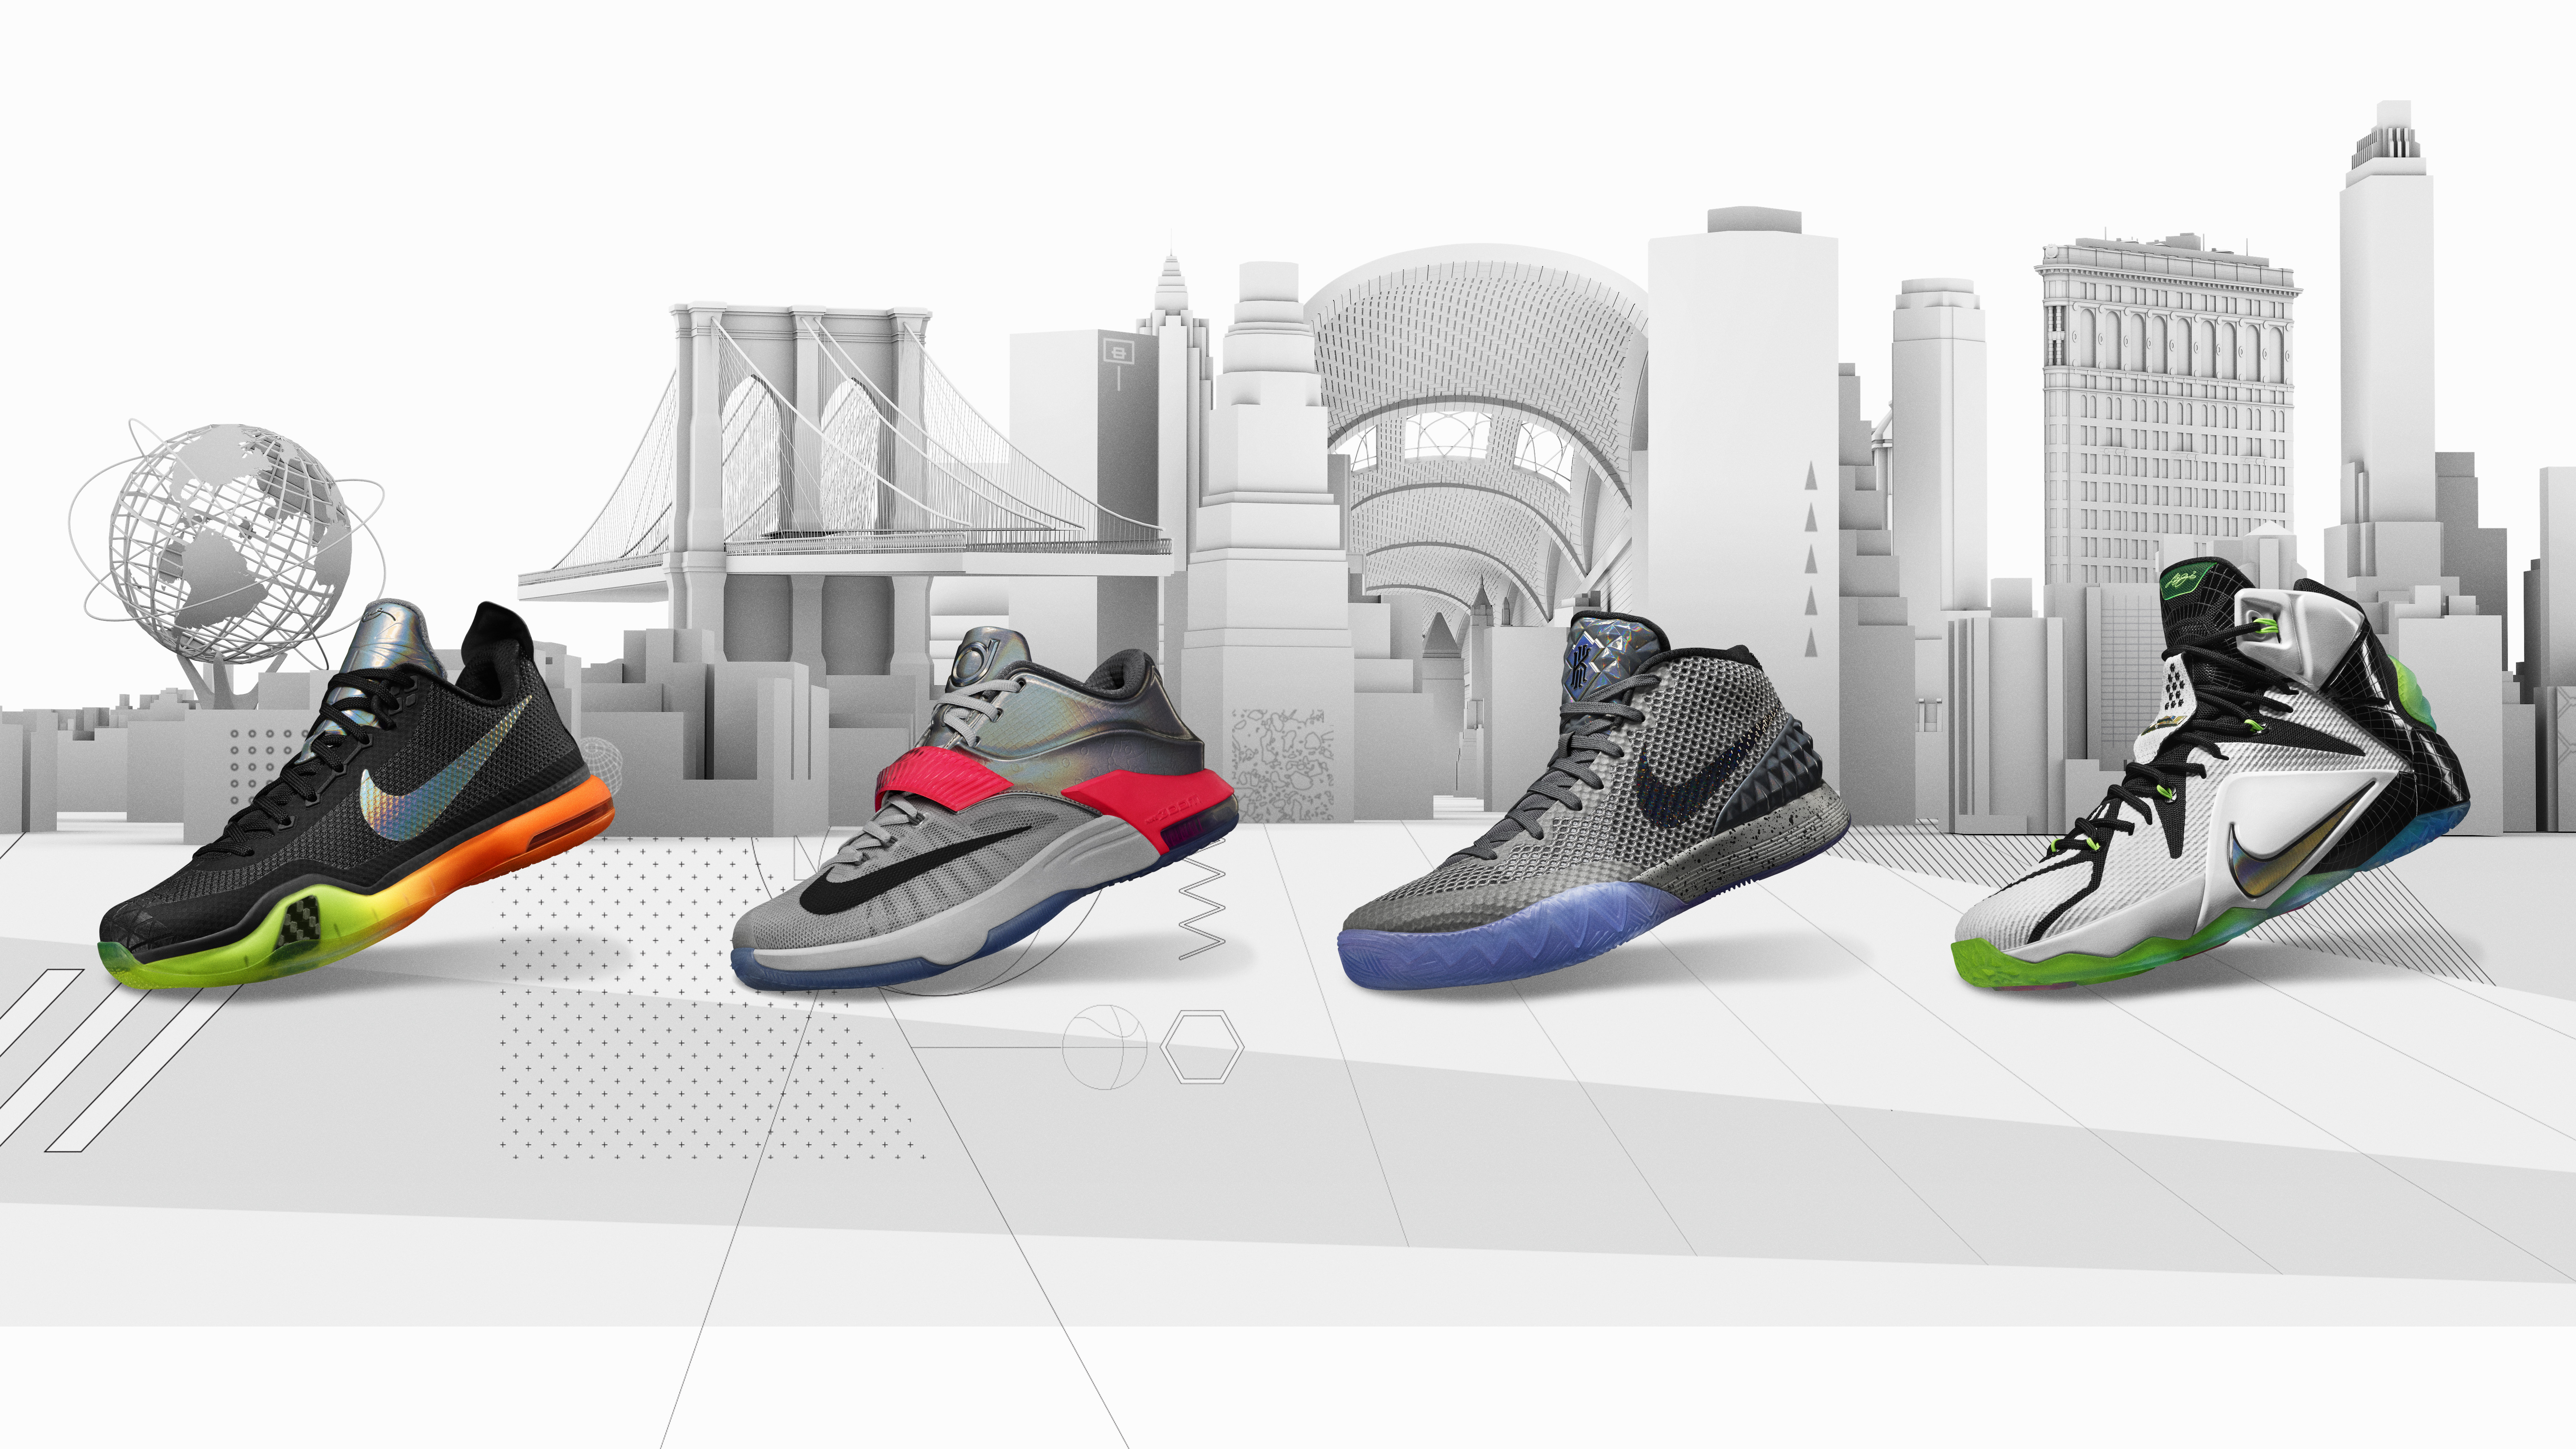 Nike Basketball Collection Honors Nyc's Iconic Cityscape - Iconic Nike Basketball Shoes - HD Wallpaper 